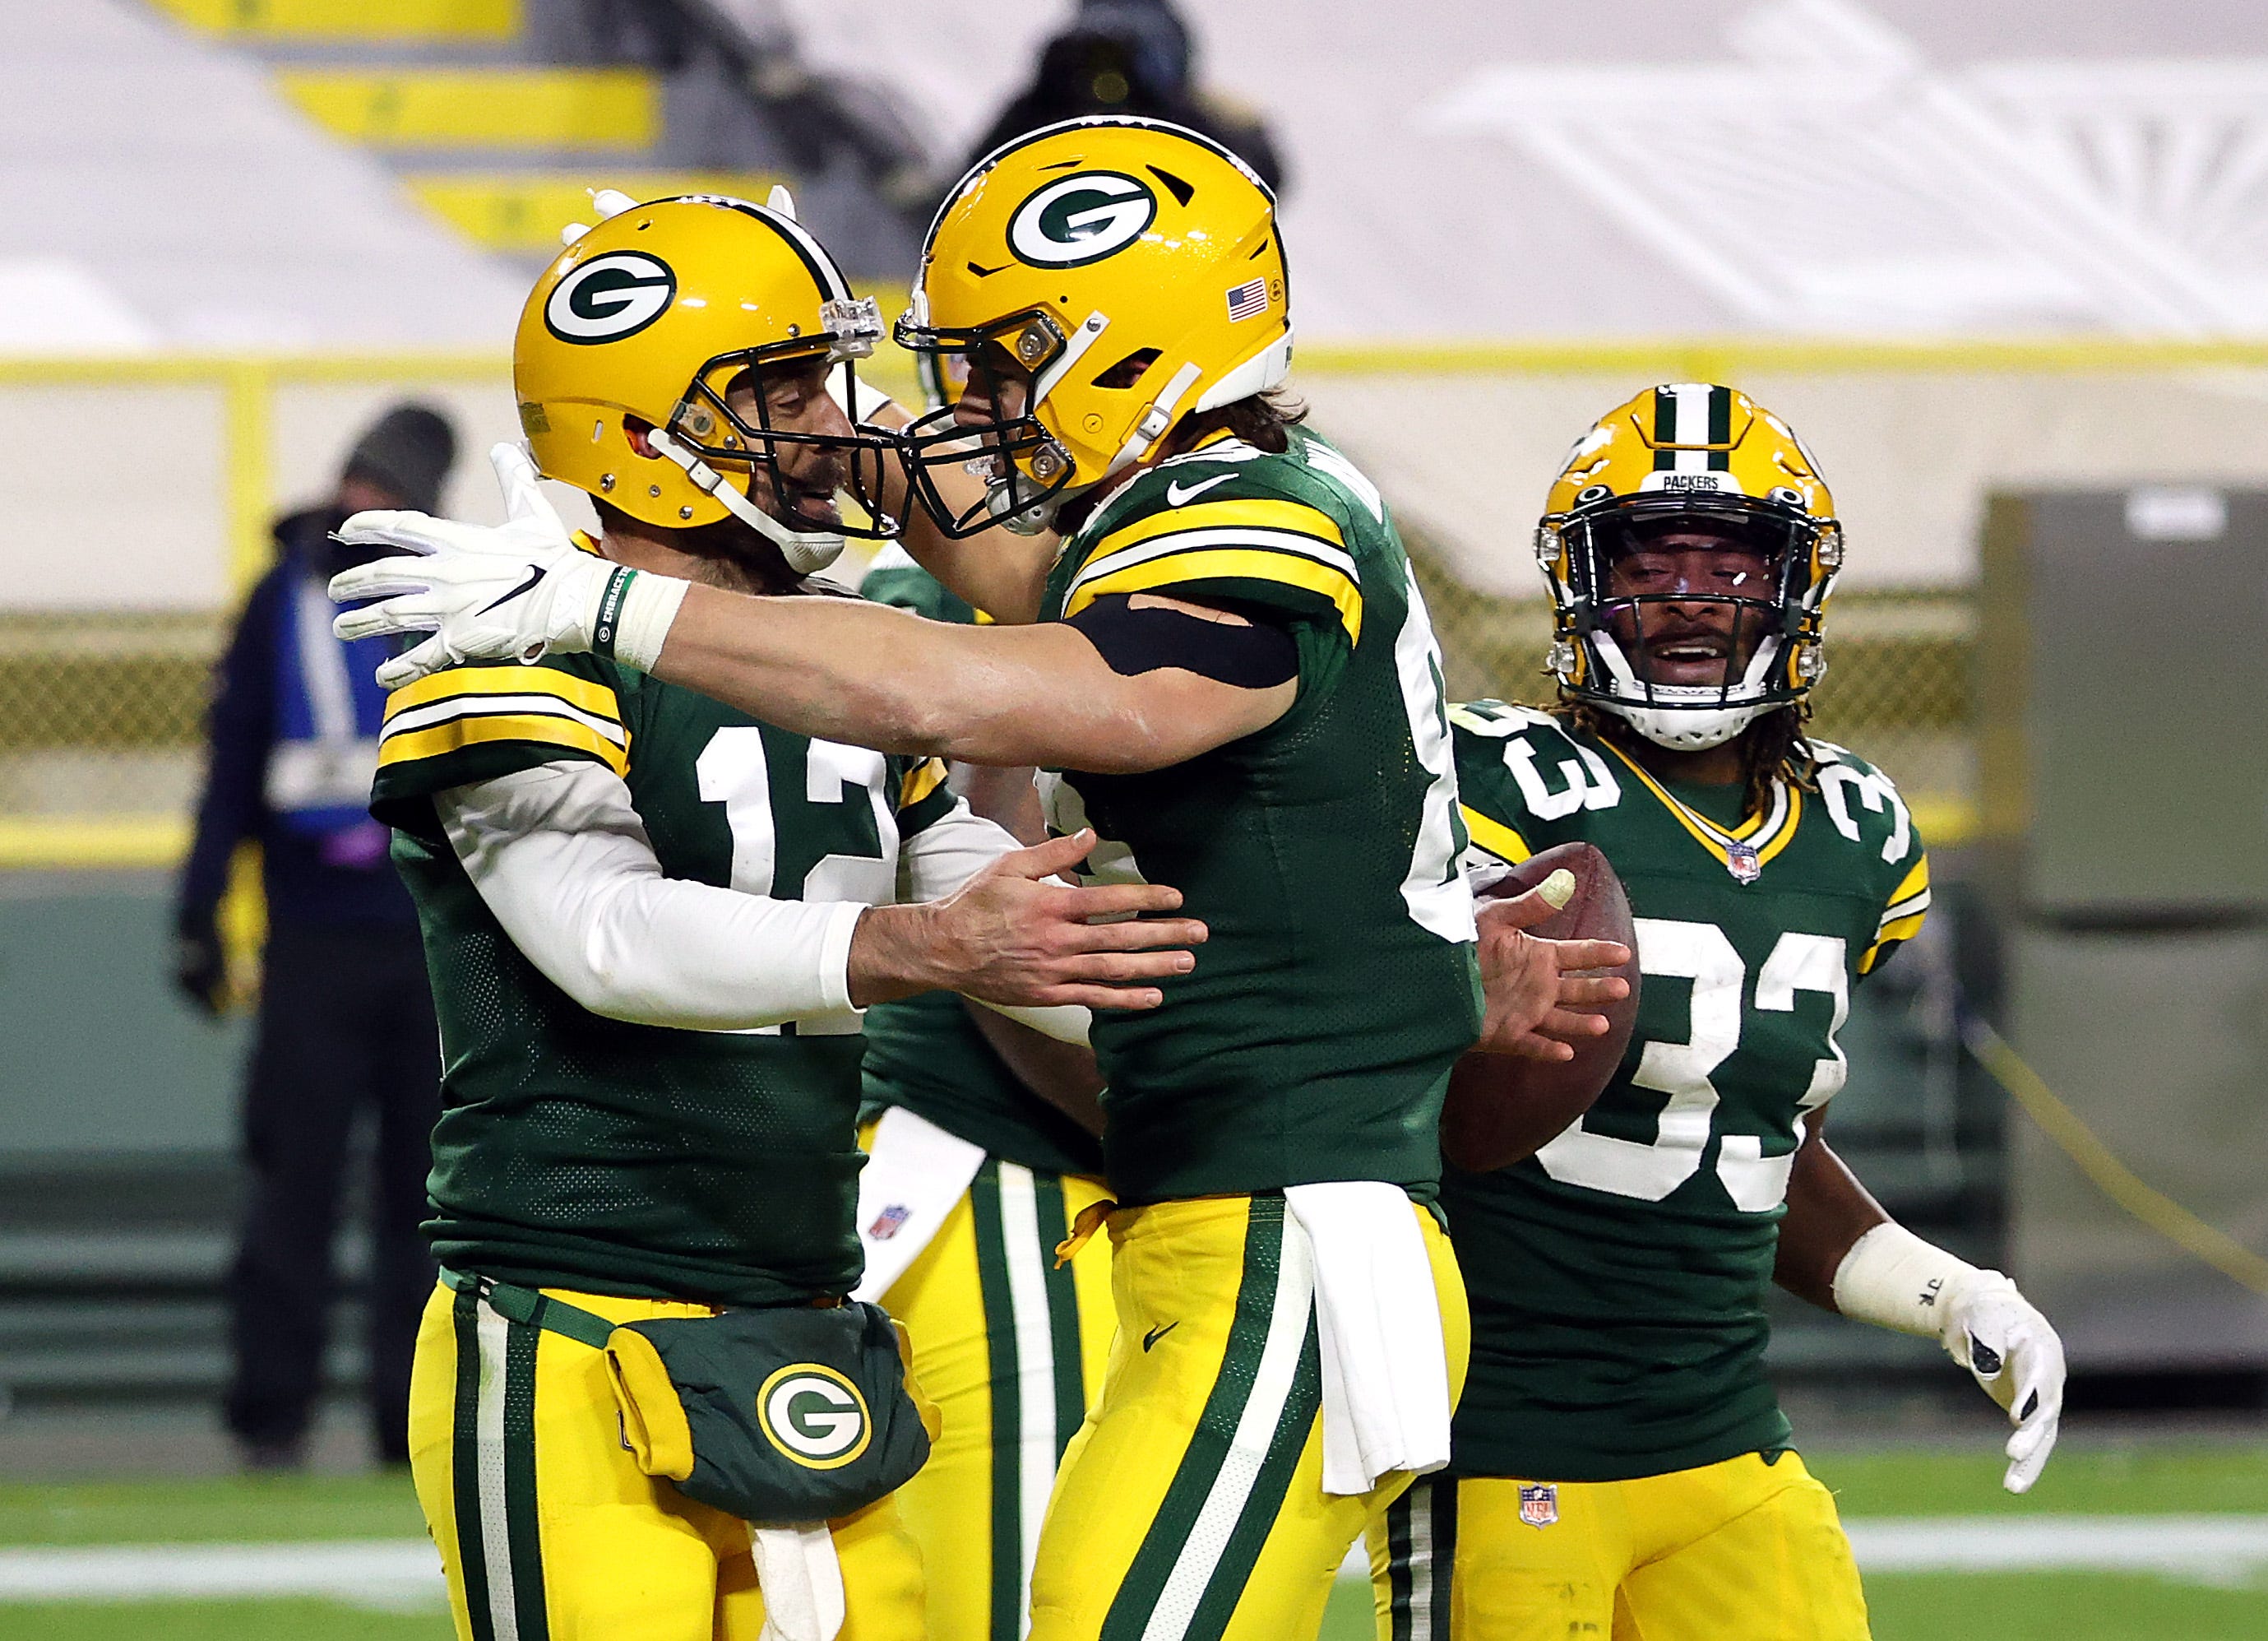 Aaron Rodgers, Packers make quick work of Bears in rout